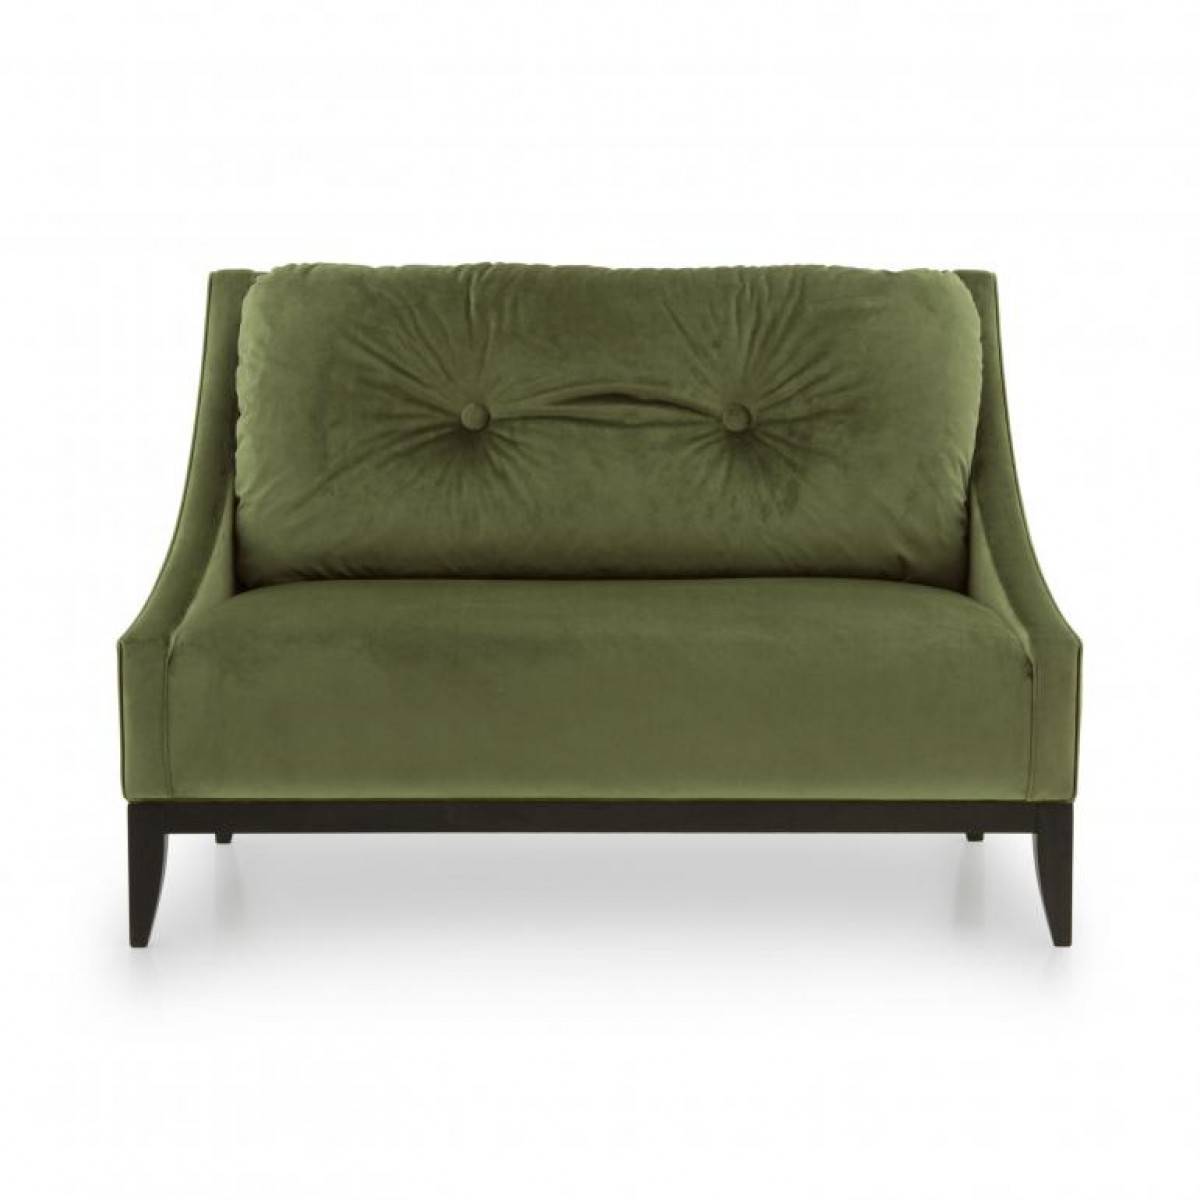 Contempoary Italian love seat in green velvet, 2 seater sofa with large back rest cushion 